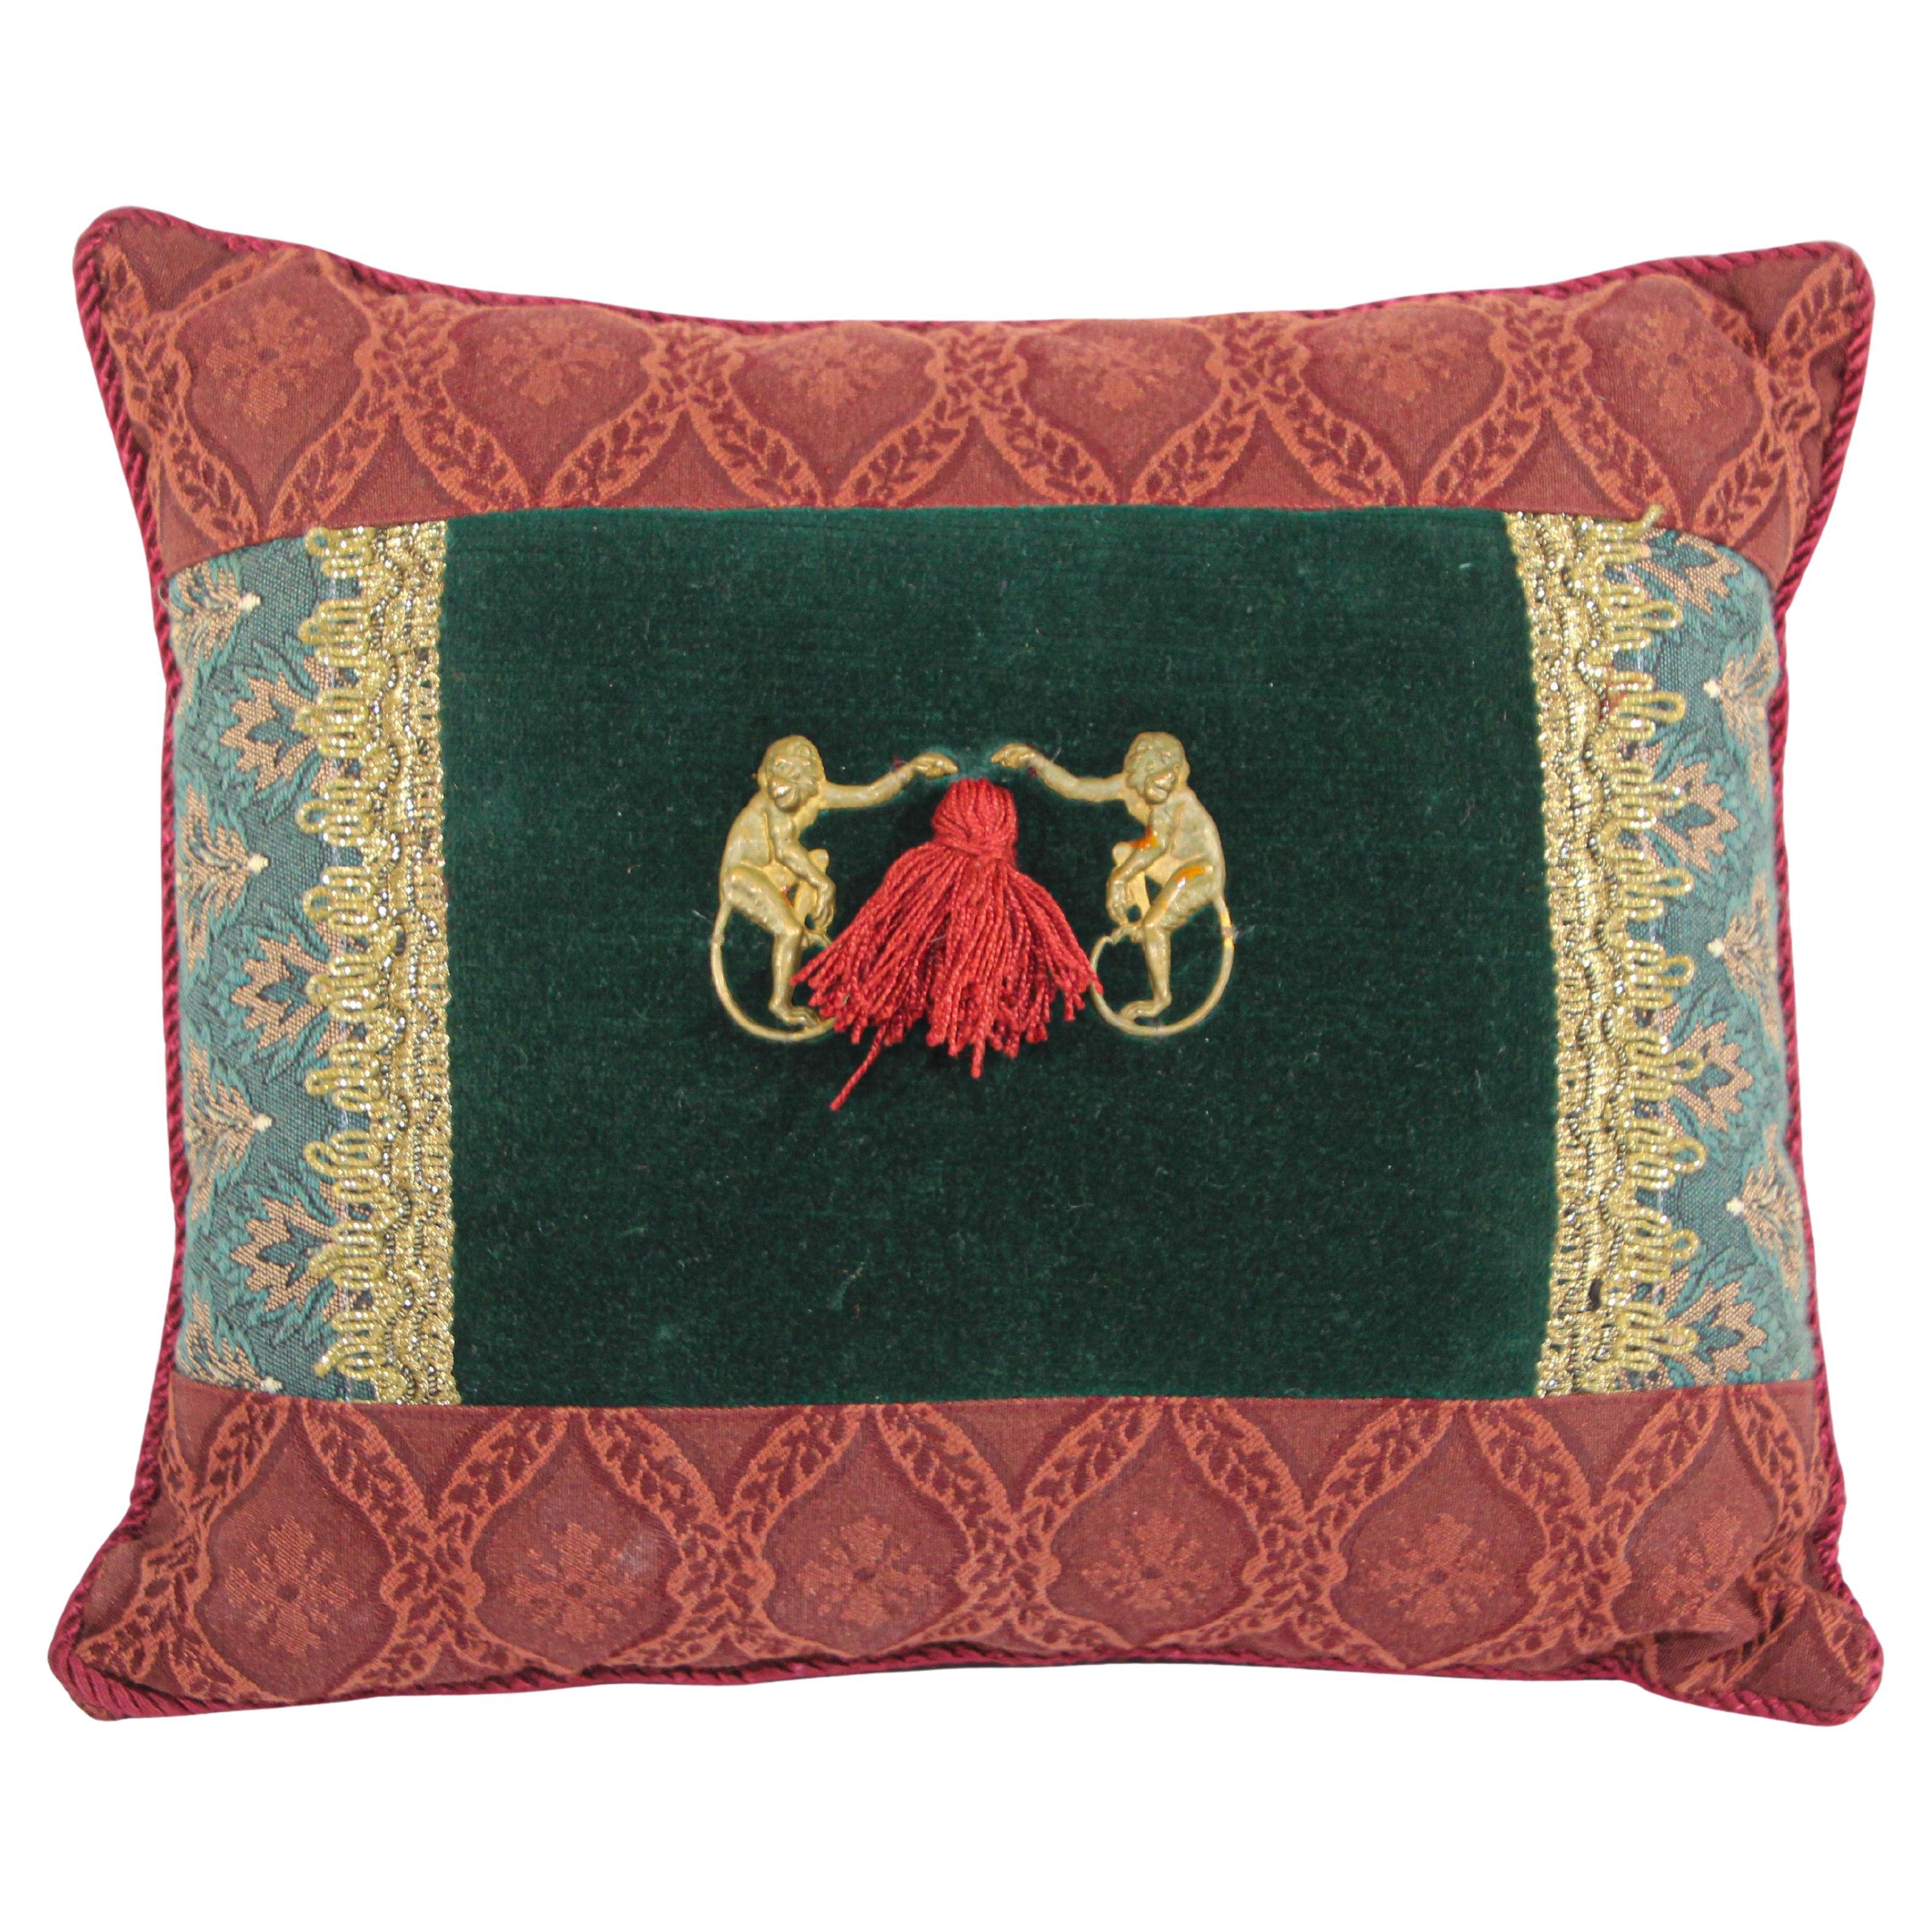 Vintage Spider Monkeys Red and Green Throw Pillow